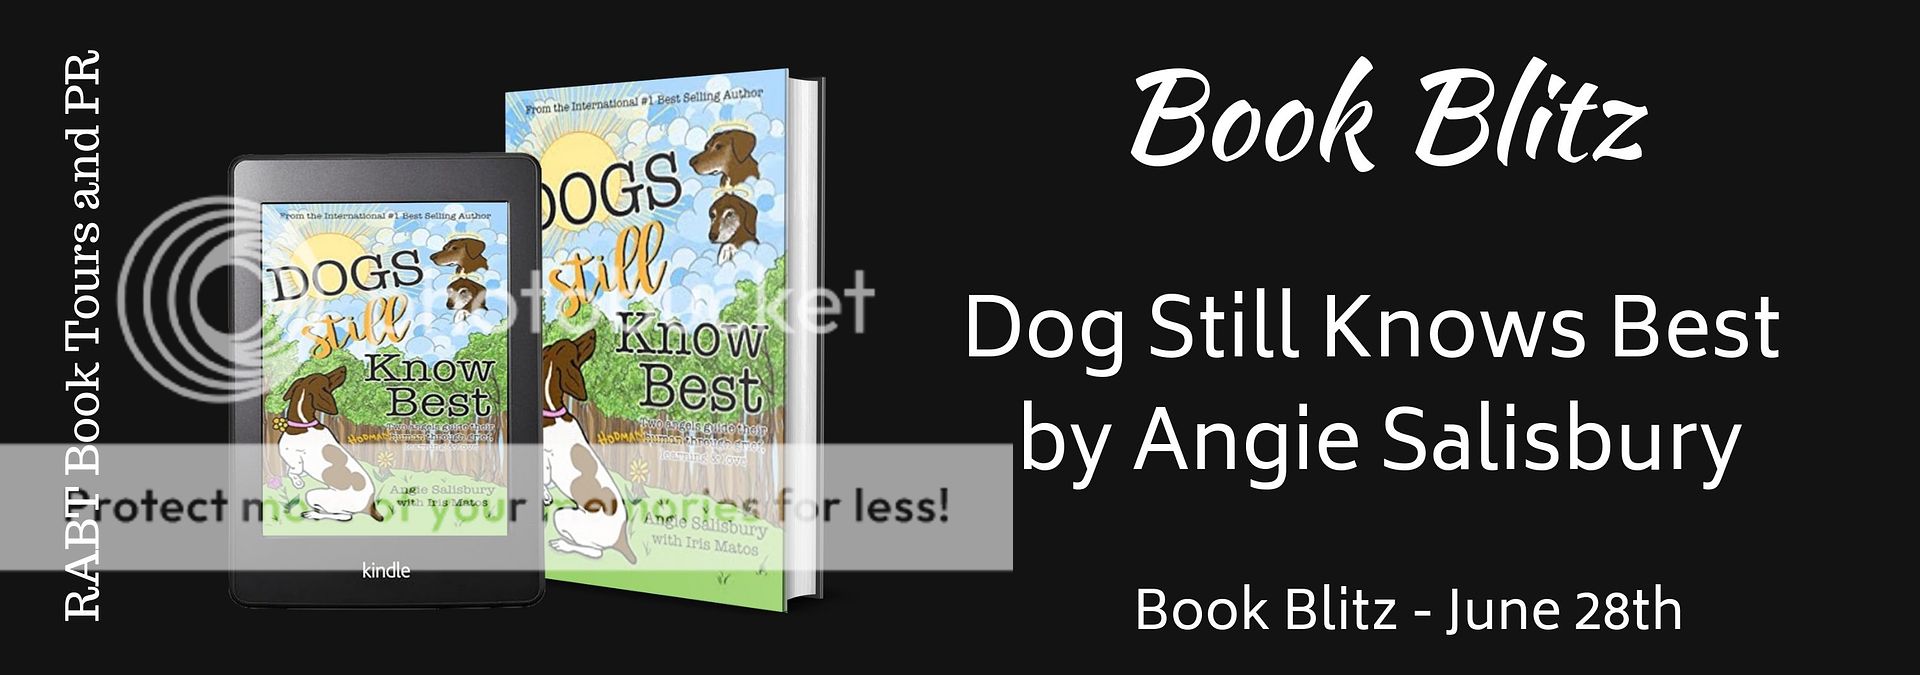 Book Blitz: Dogs Still Know Best by Angie Salisbury @AngieSalisbury1 #promo #nonfiction #grief #pets @RABTBookTours